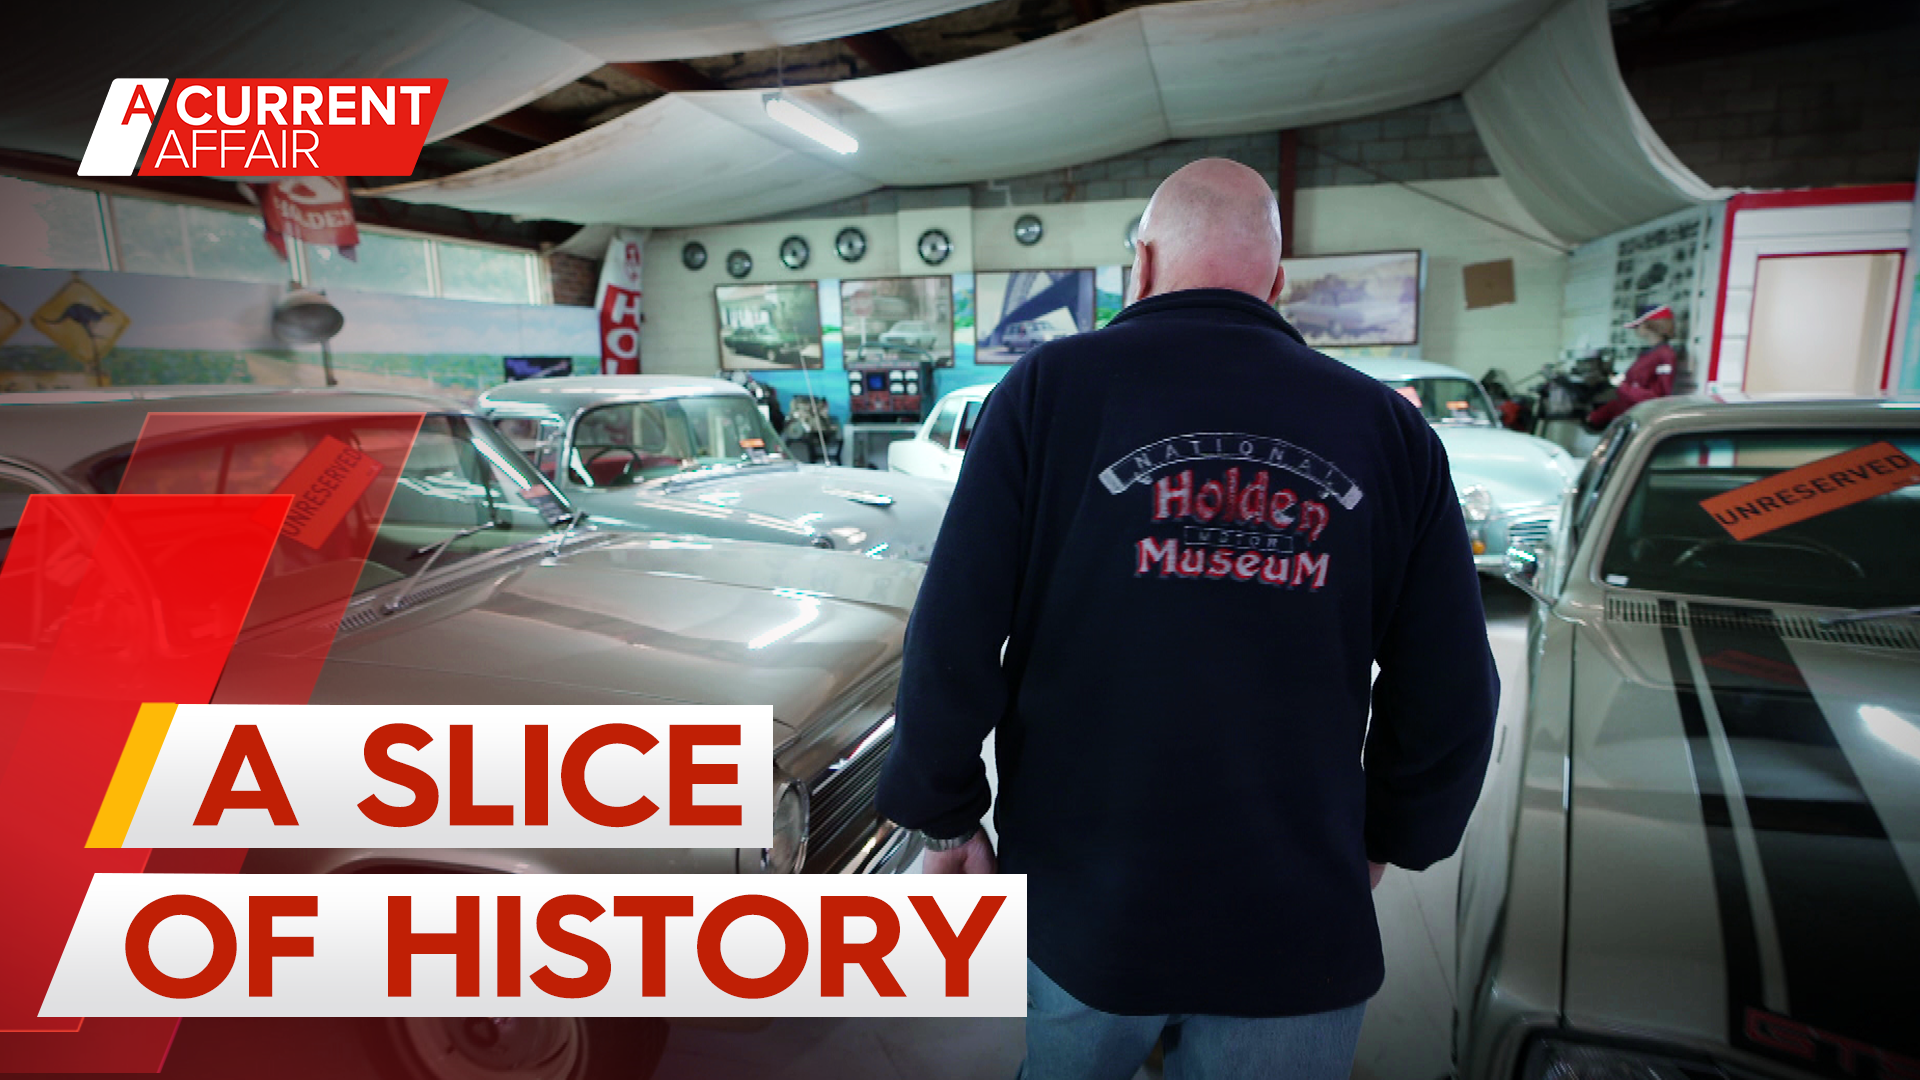 Motorheads' chance to snag a slice of Holden history